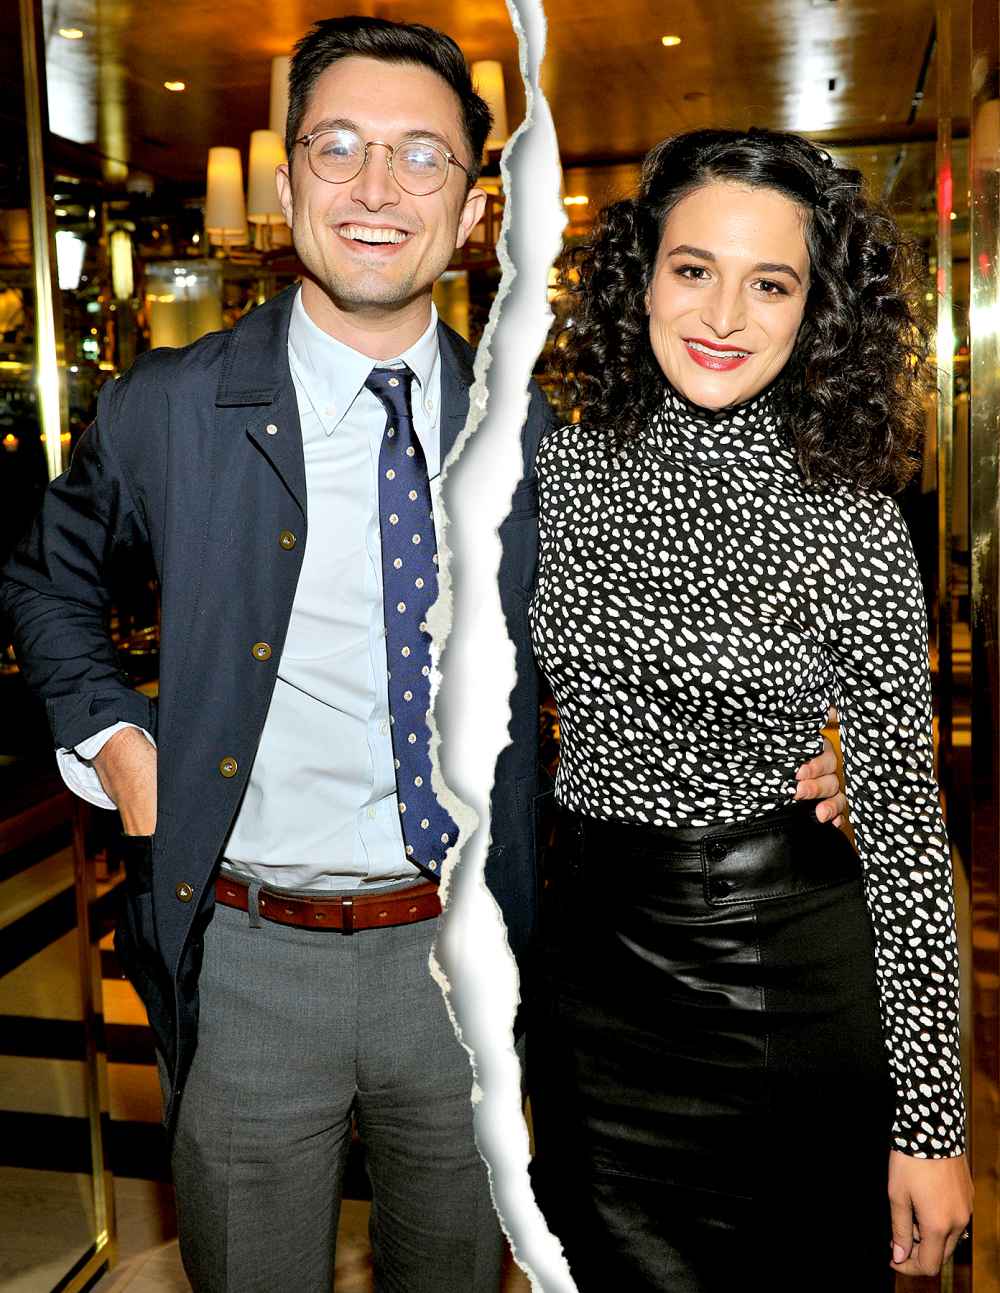 Dean Fleischer-Camp poses with Jenny Slate at the dinner hosted by Krista Smith for Jenny Slate at the Tory Burch Rodeo Flagship on November 17, 2014 in Beverly Hills, California.